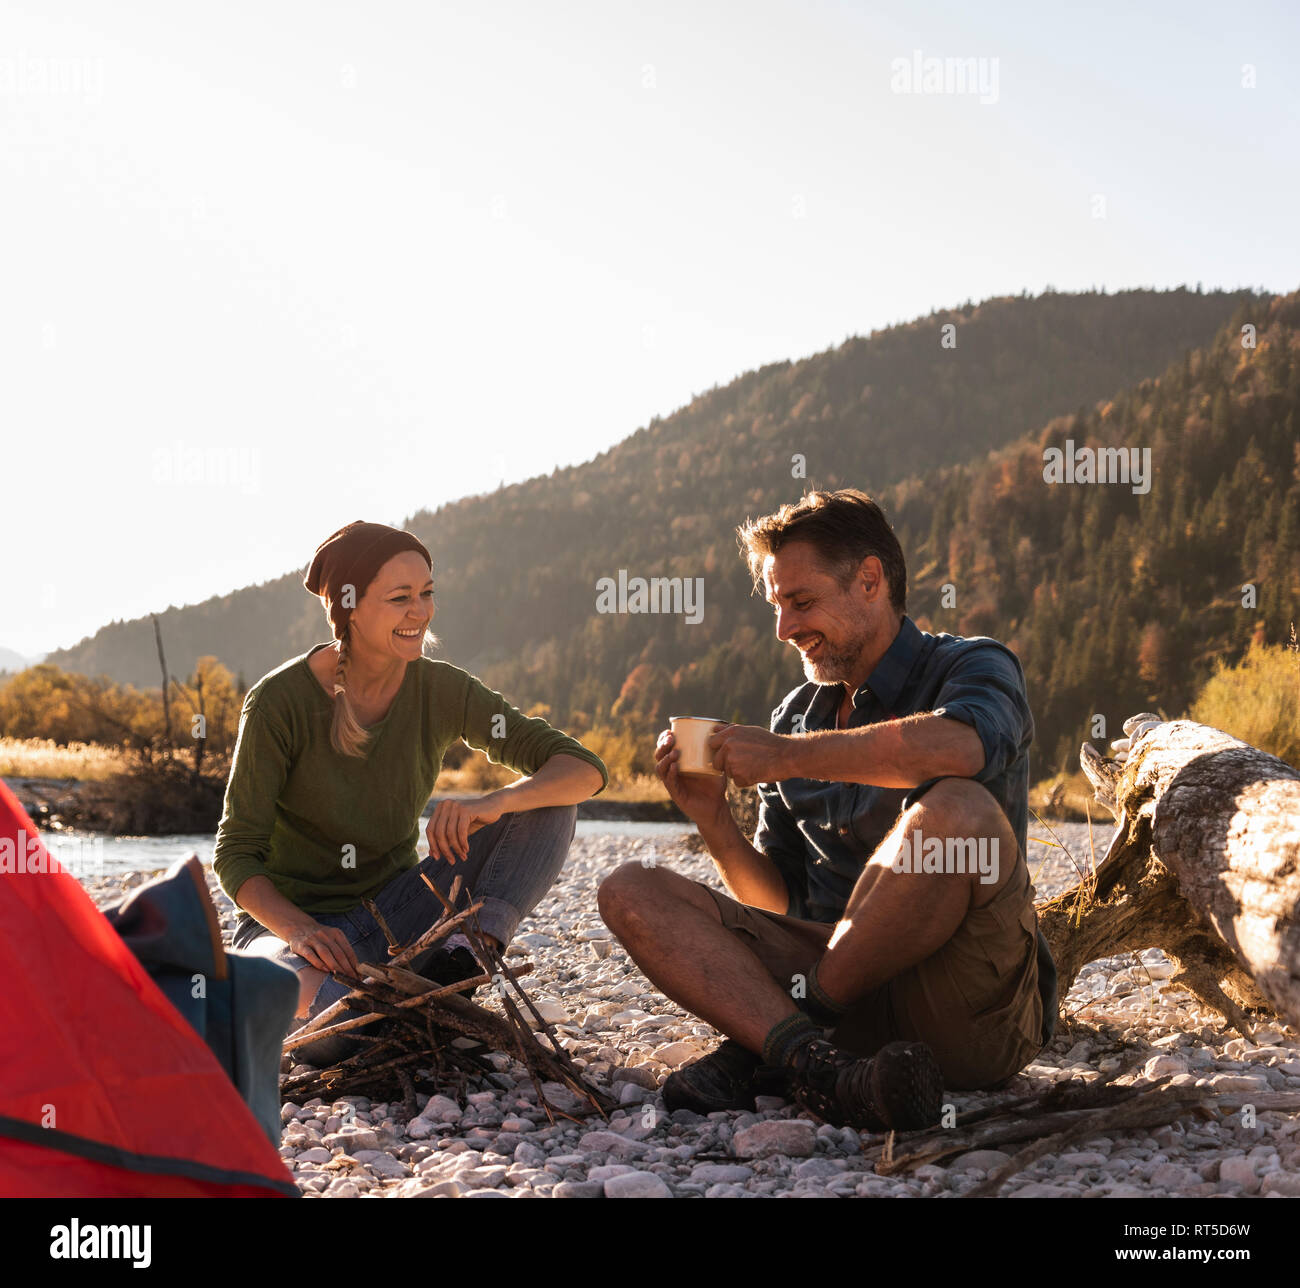 Mature couple camping at riverside in the evening light Stock Photo